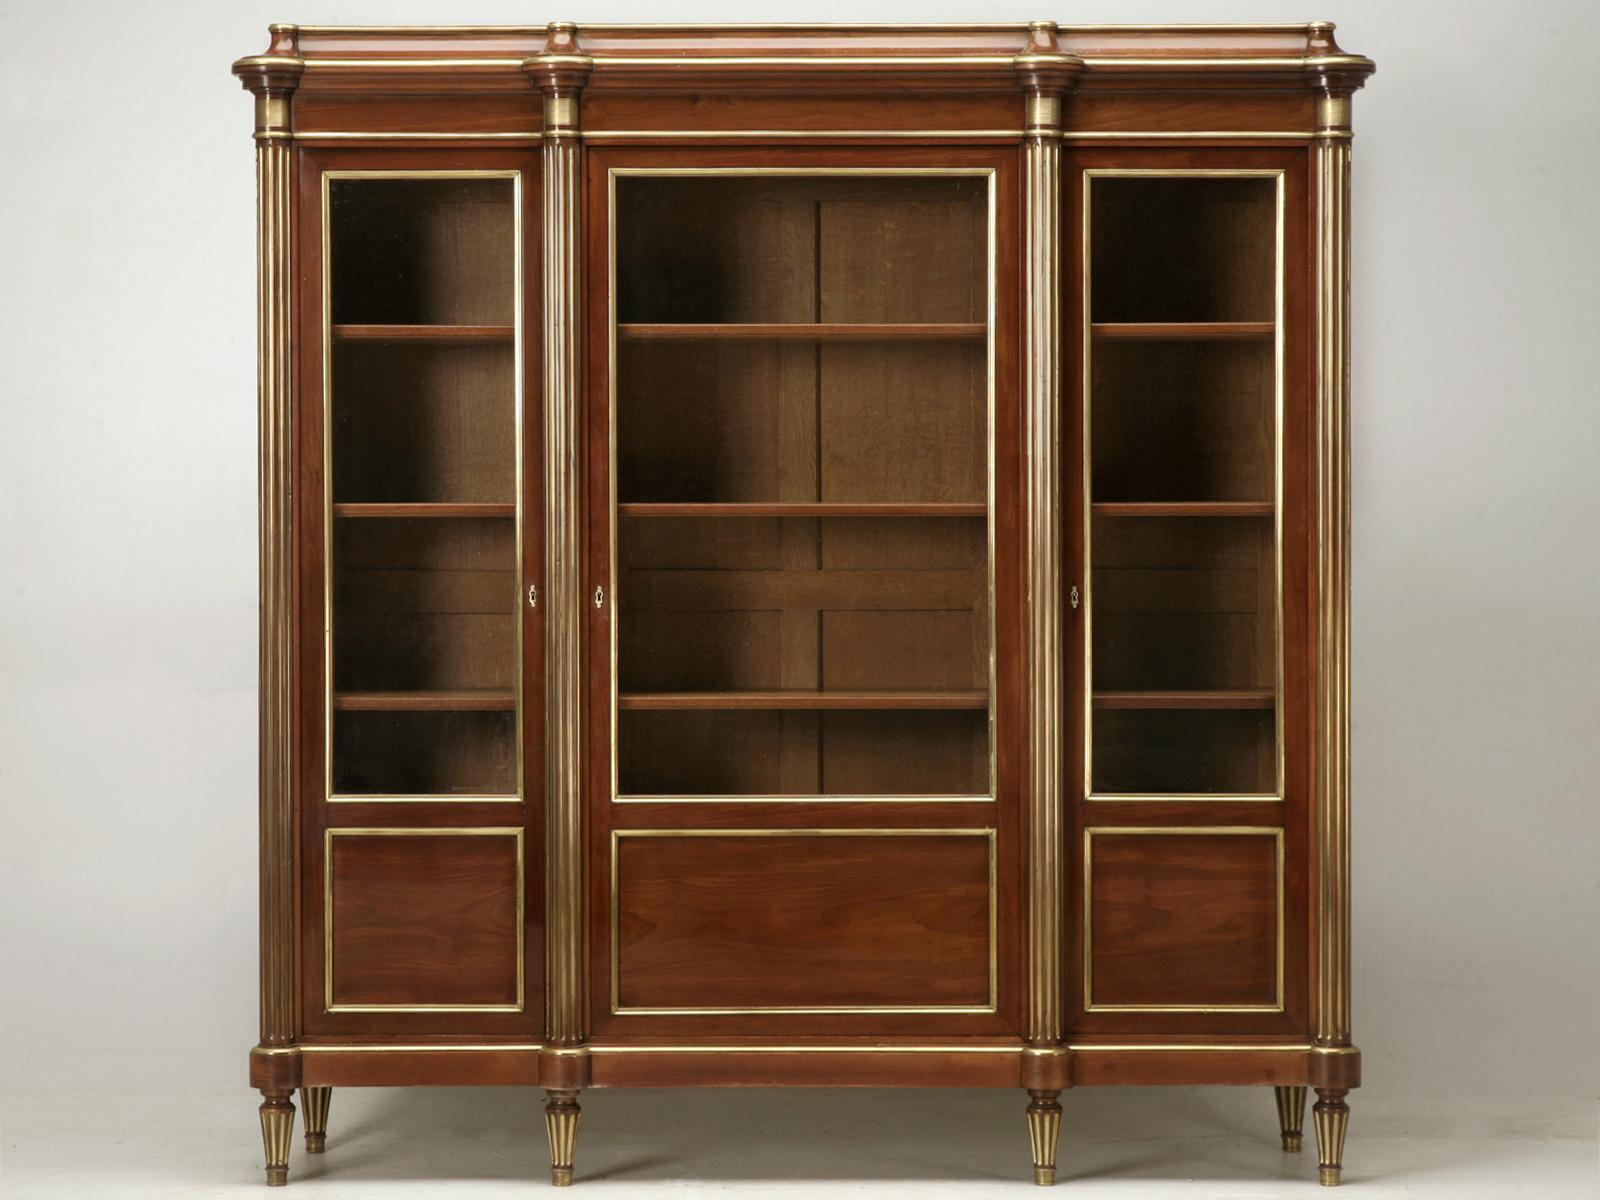 Antique French Louis XVI style mahogany bookcase with brass trim, circa 1890-1910. Usually these are just begging to be ebonized, but the quality of this bibliotheque was so high, and the original French polish finish so good, that I could not bring